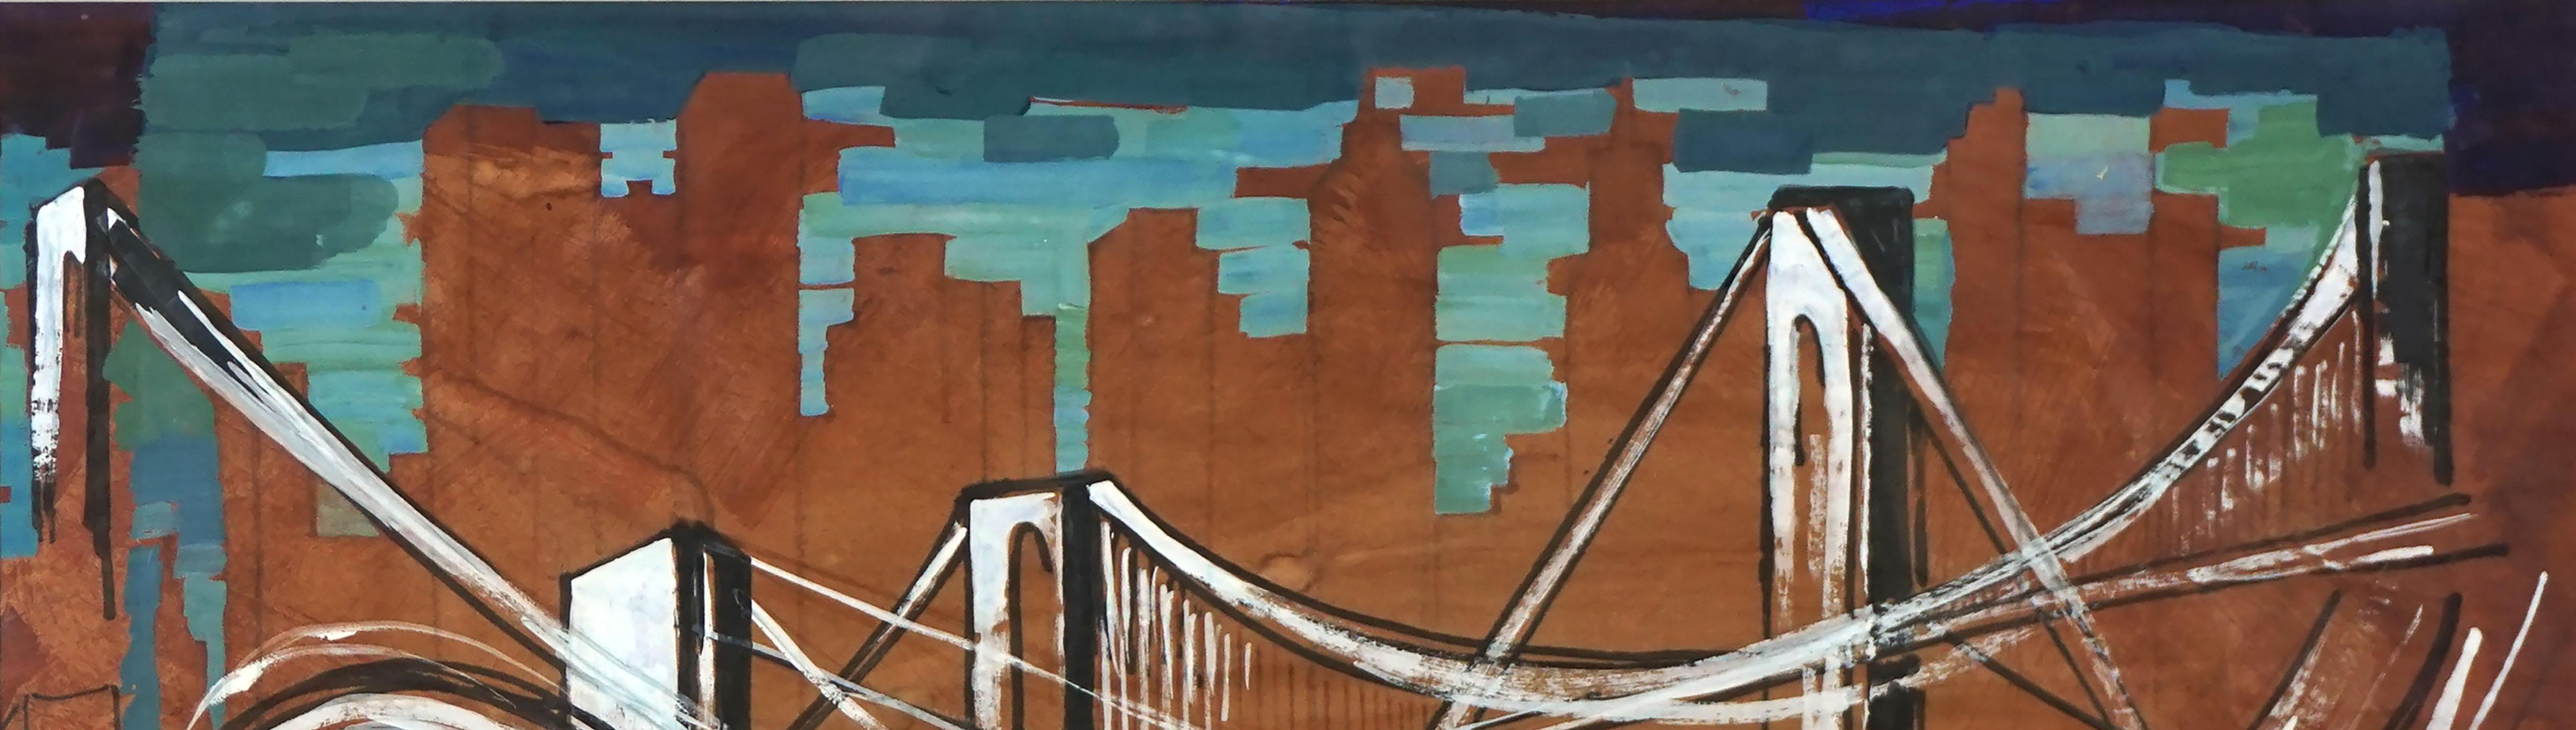 1980's George Washington Bridge Abstracted Landscape - Brown Landscape Painting by Bing